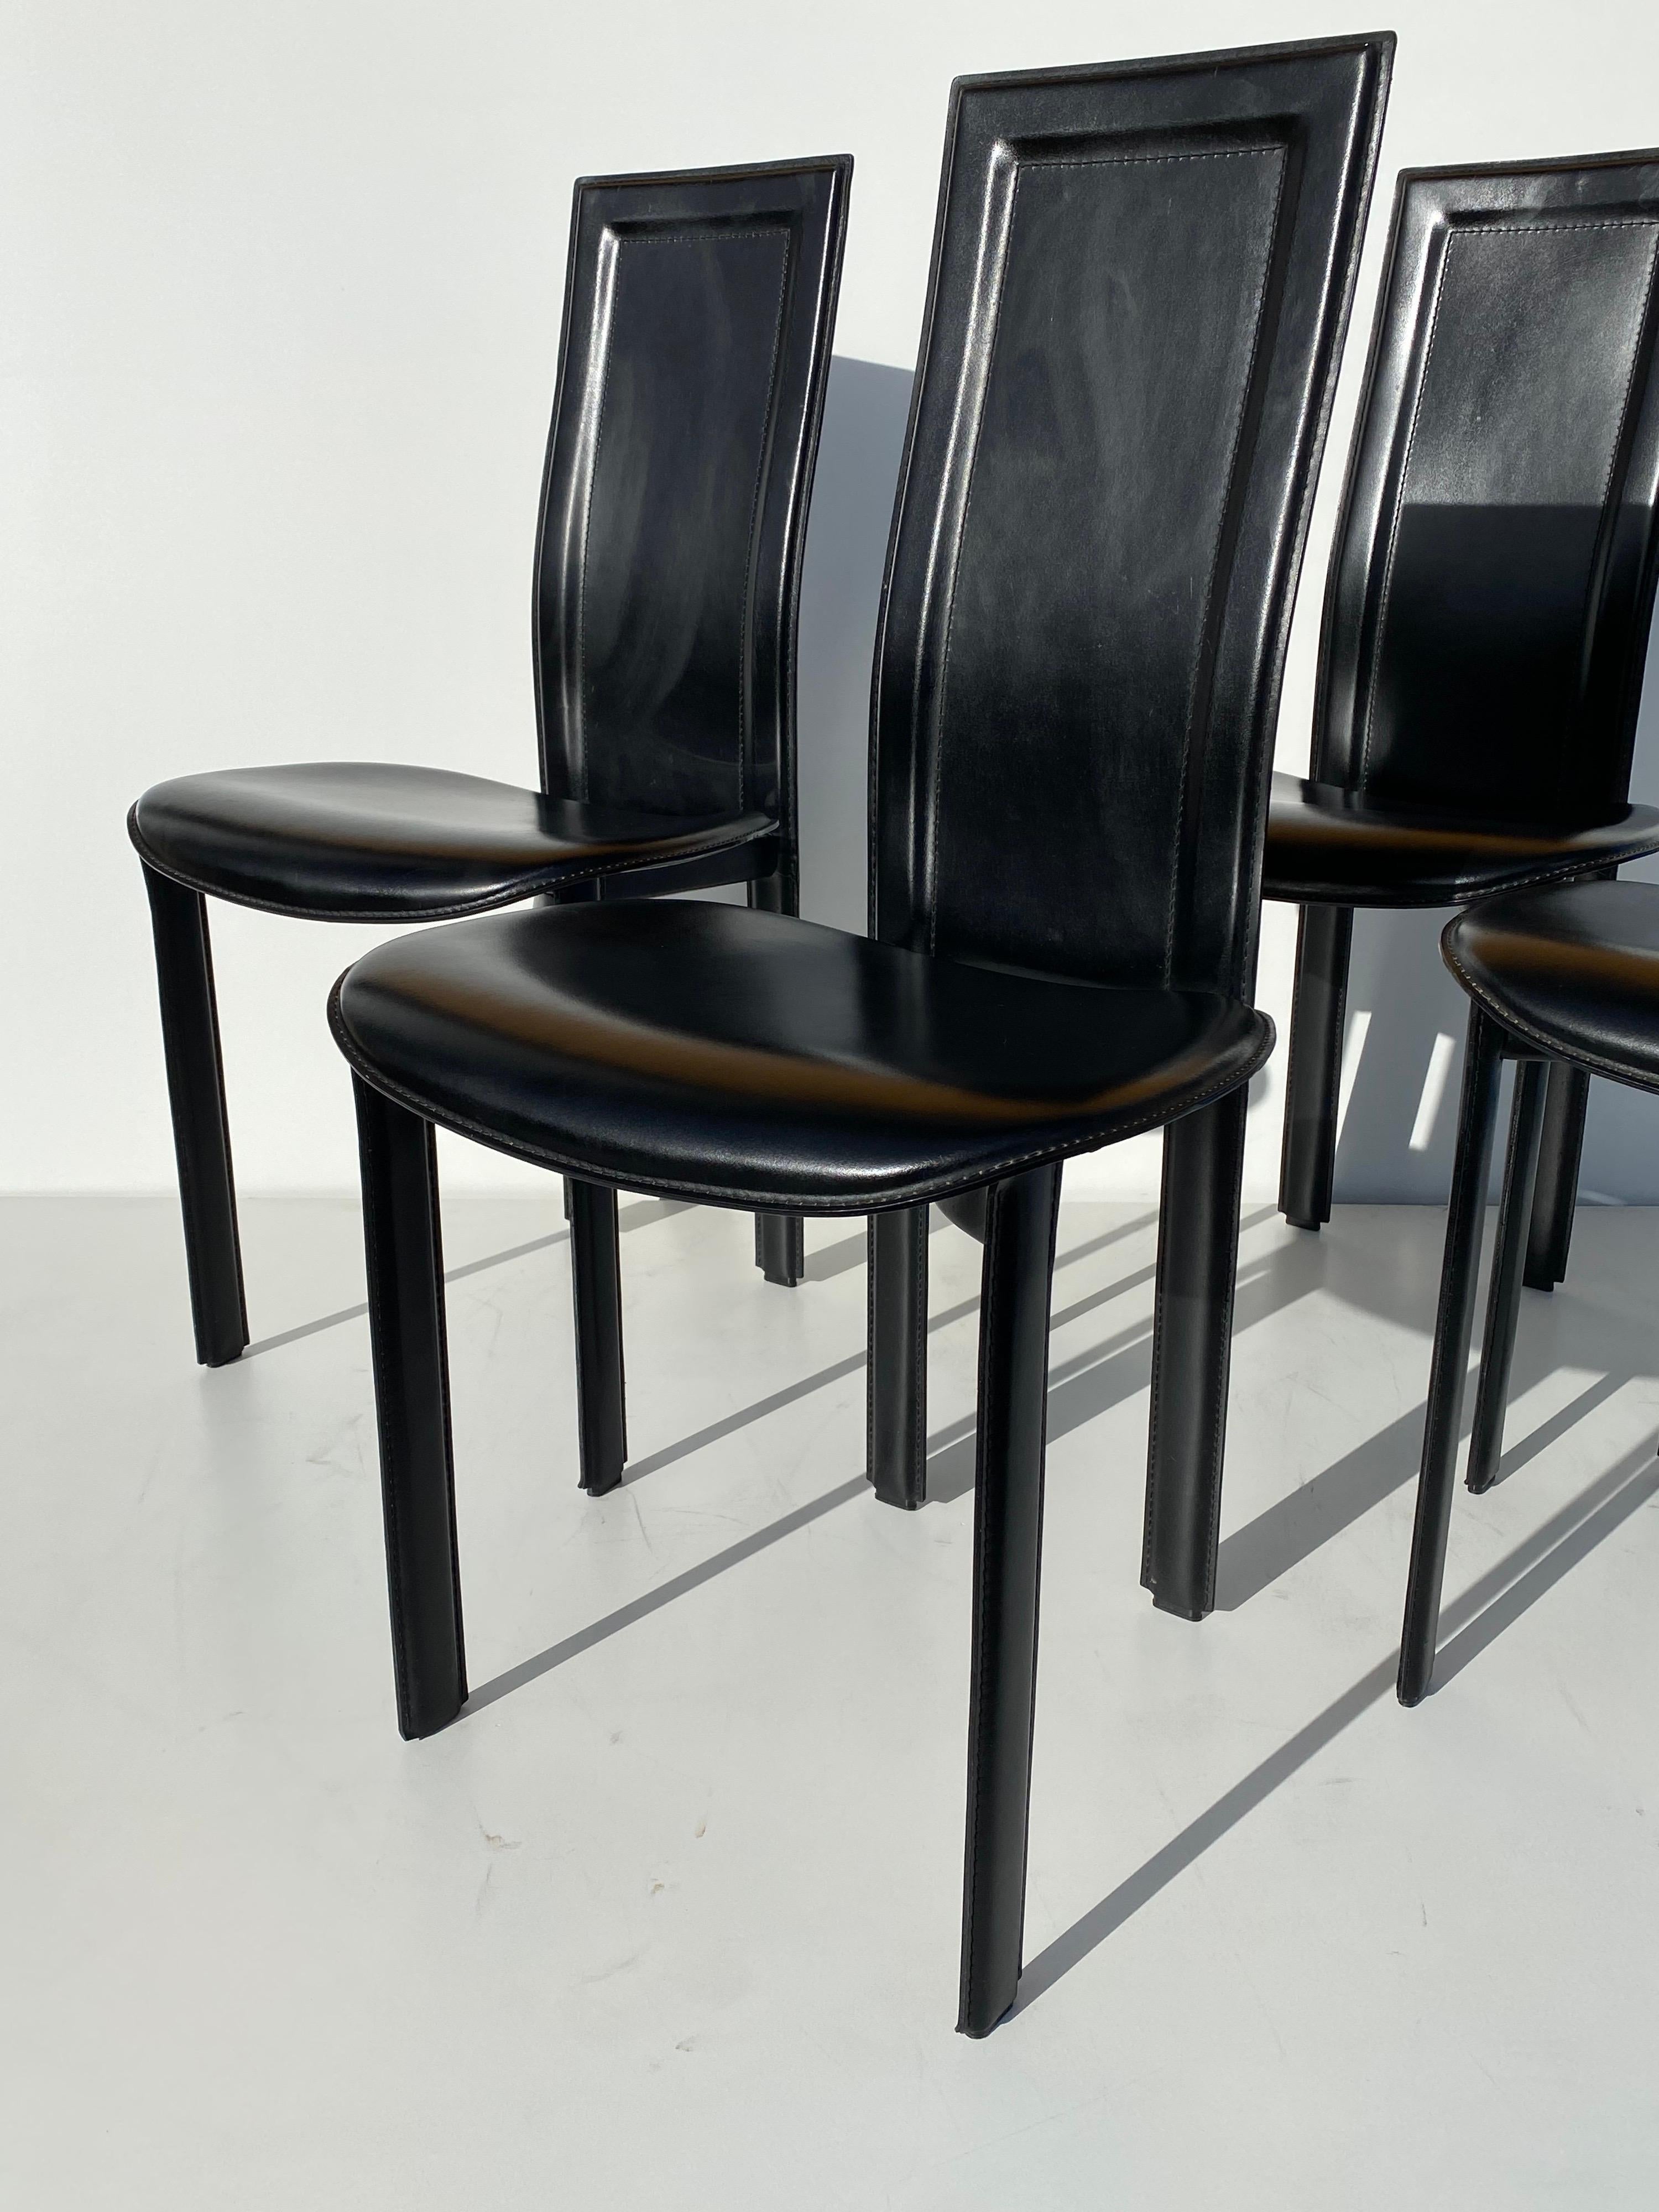 Set of four black leather dining chairs by Cattelan Italia similar to leather chairs by Mario Bellini for Cassina.